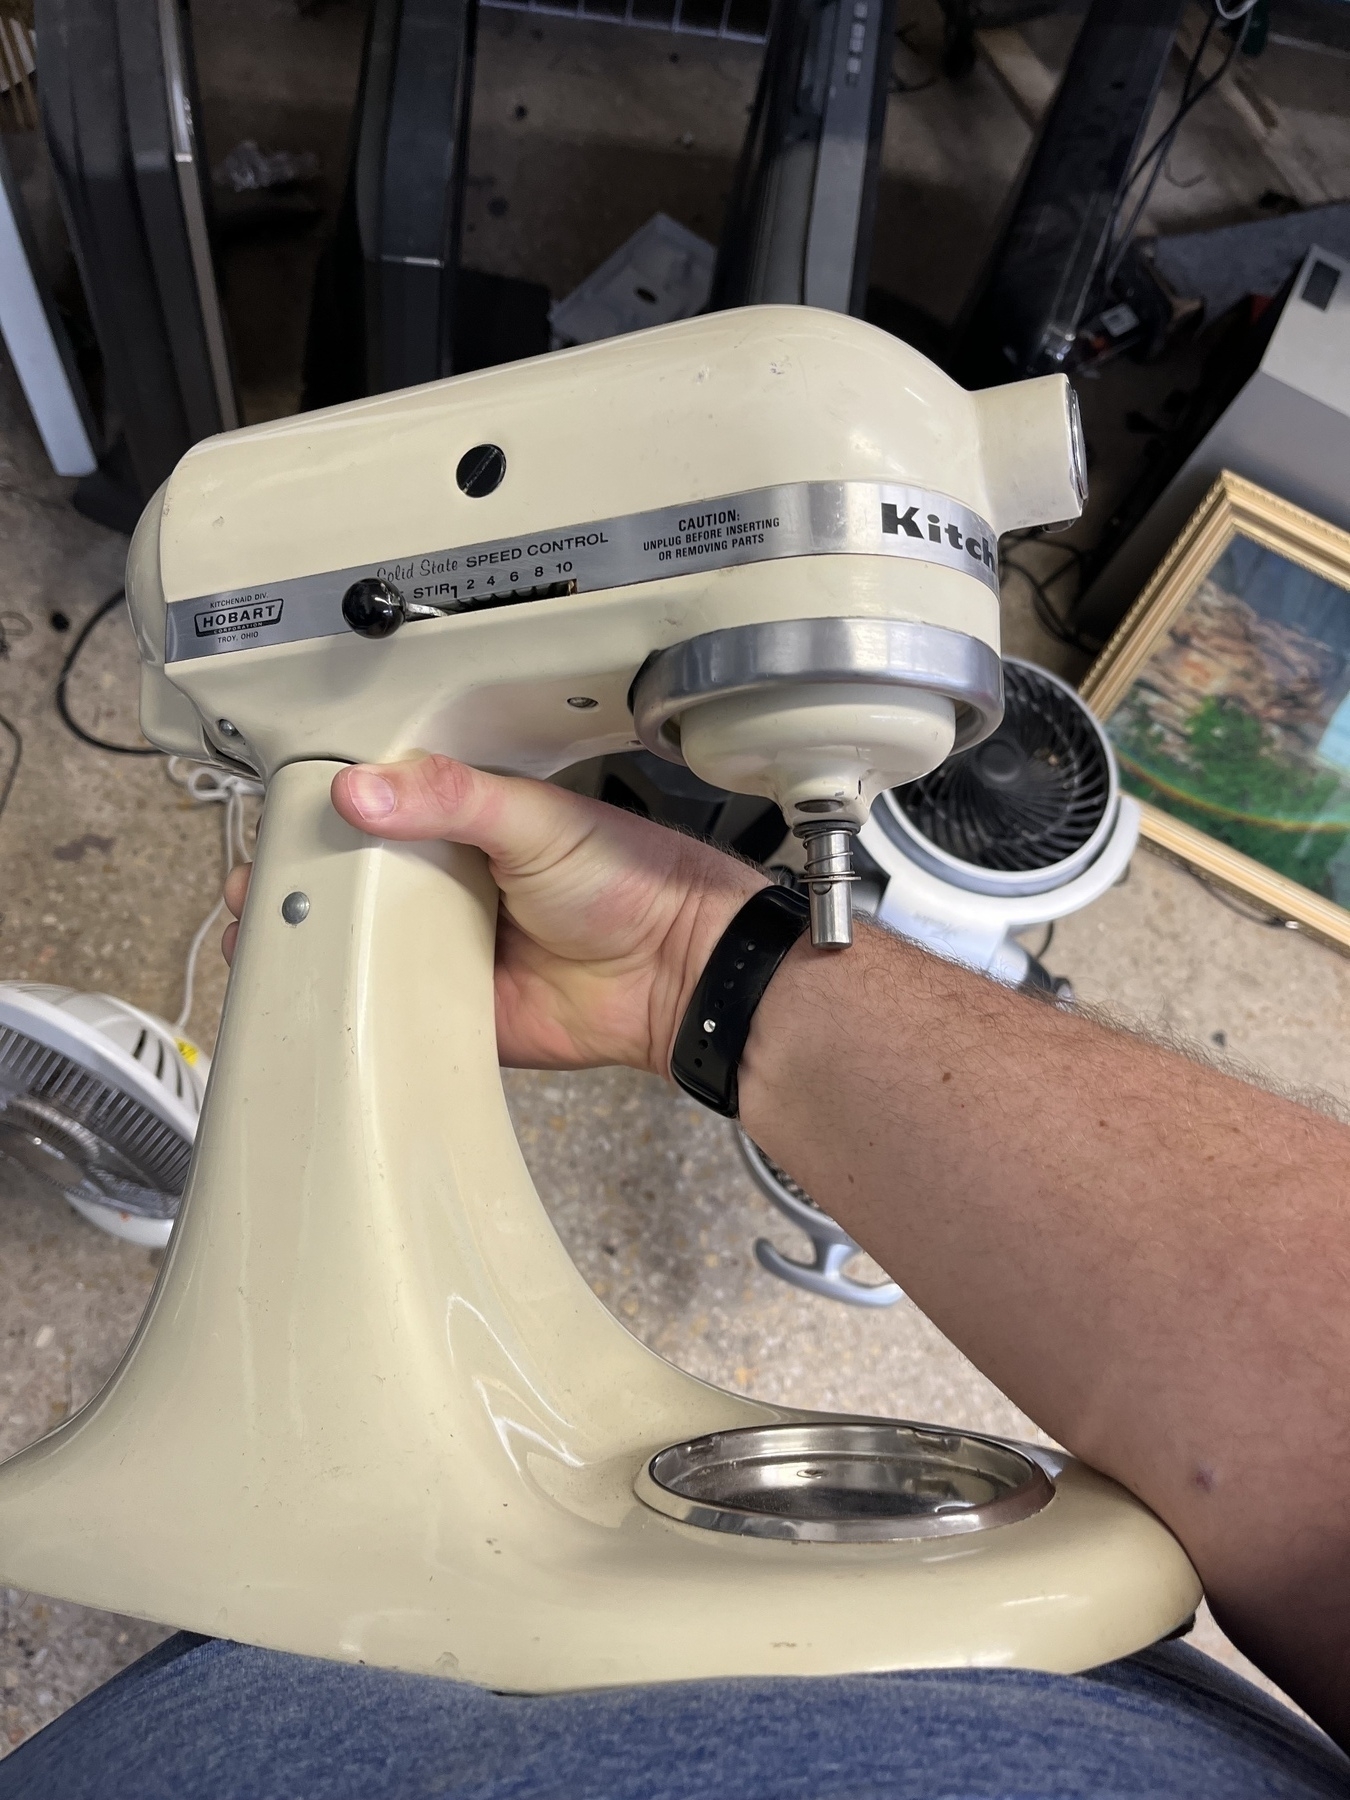 KitchenAid mixer being held up in a thrift store. 